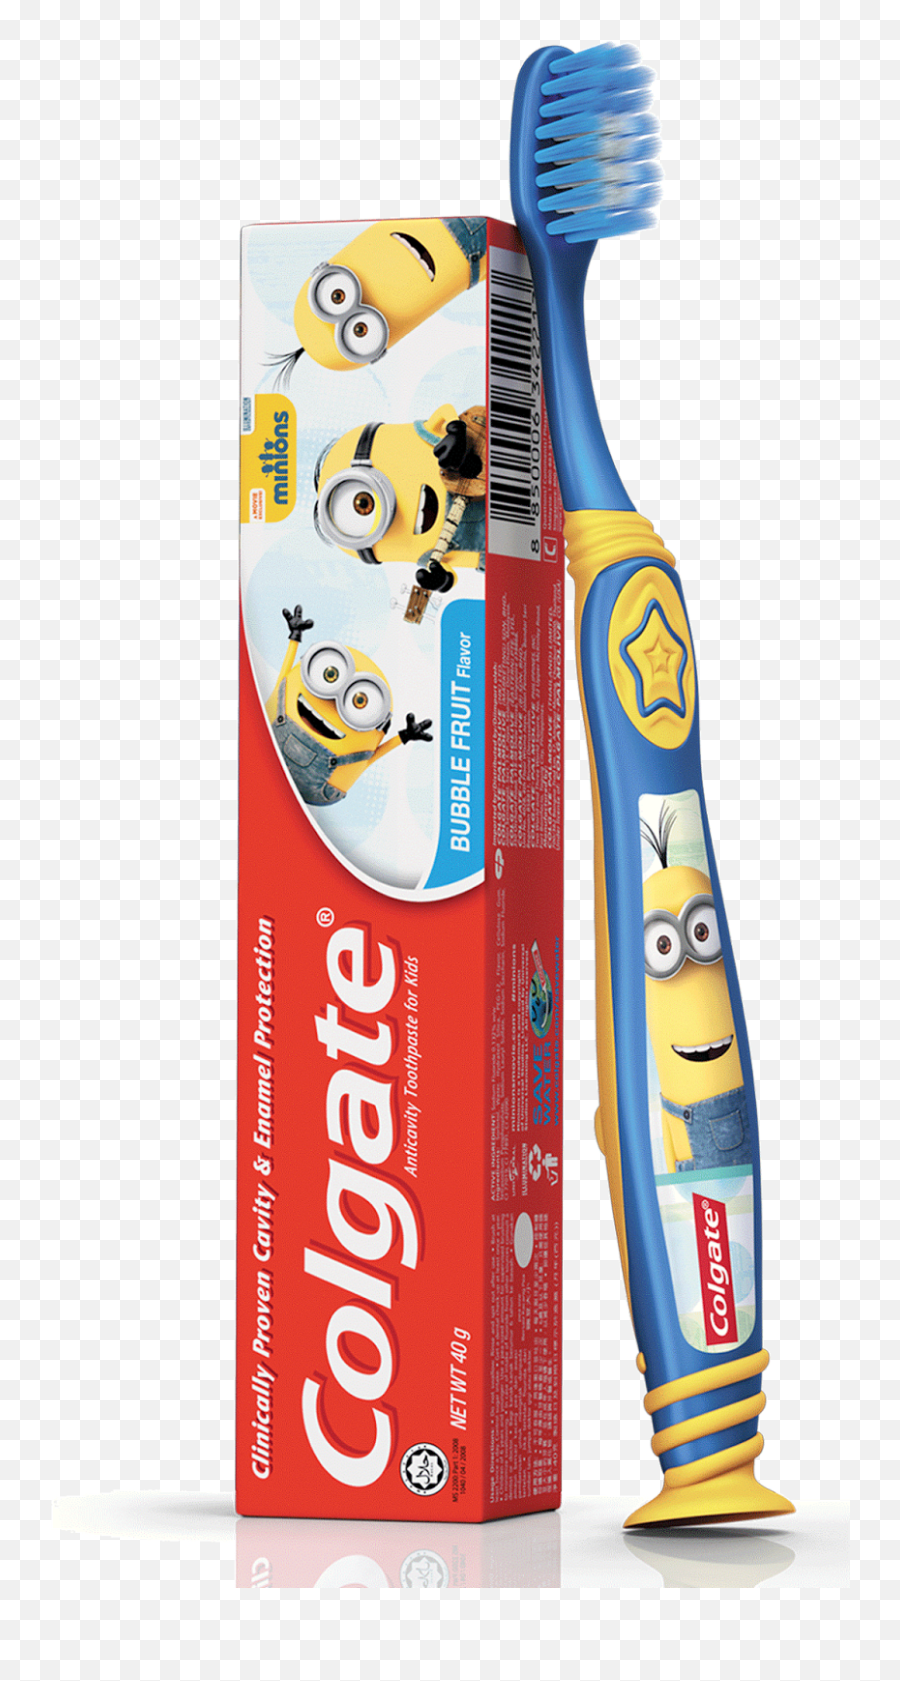 Make Brushing More Fun With Minions - Patches Of Life Kids Tooth Paste And Tooth Brush Emoji,Minion Emotions